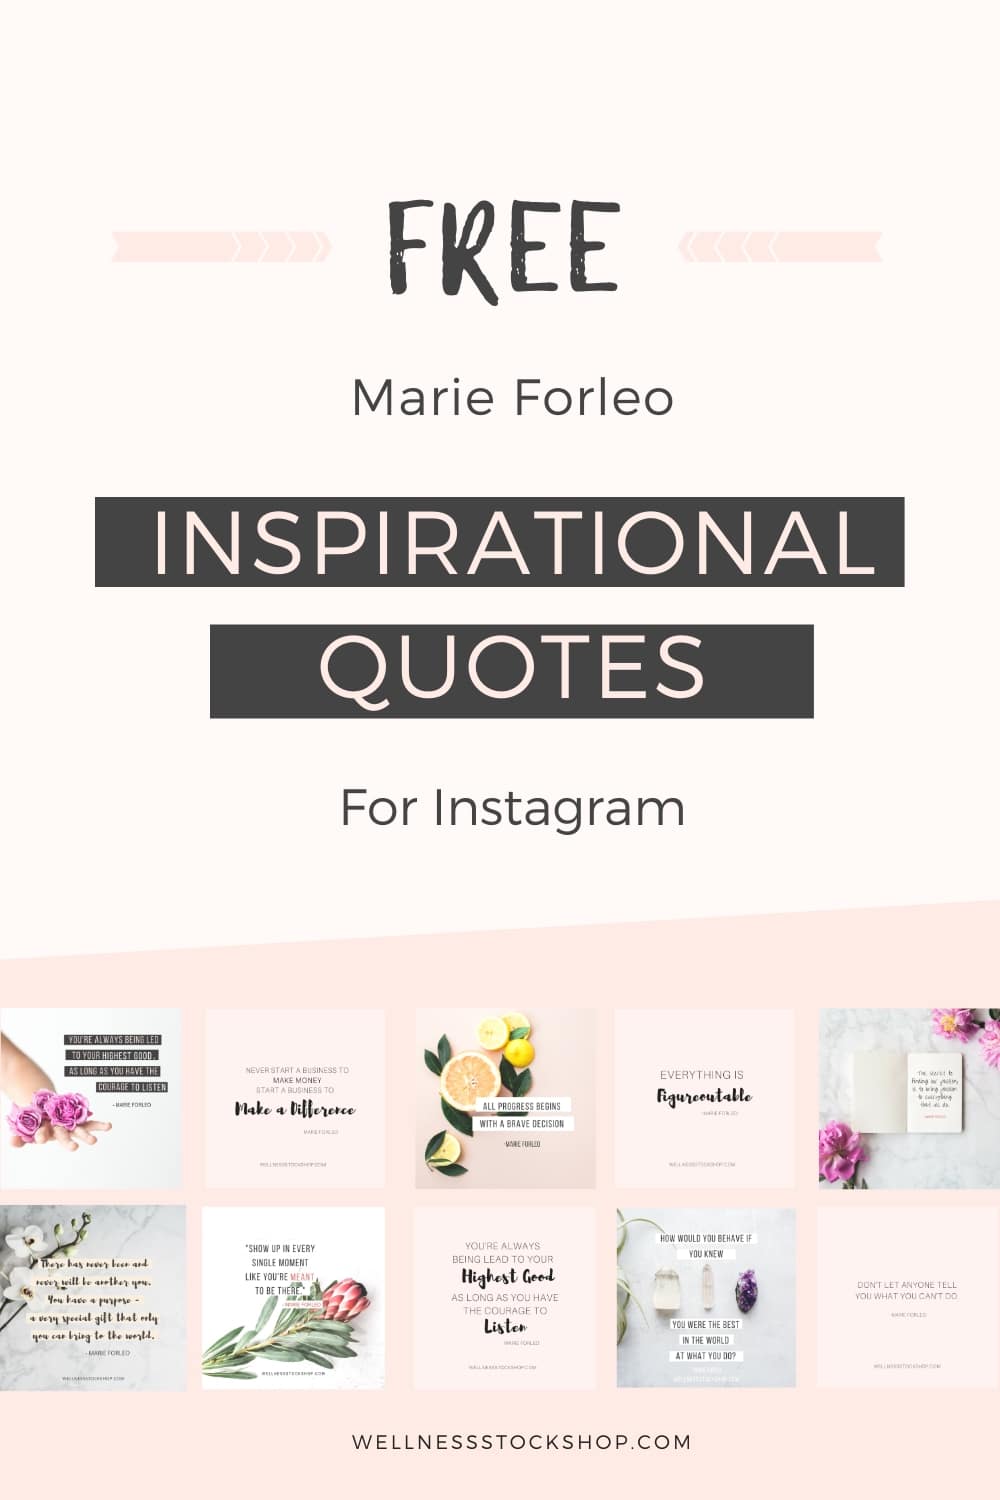 Download these 10 free Marie Forleo Inspirational quotes for Instagram, including Everything is Figureoutable and more